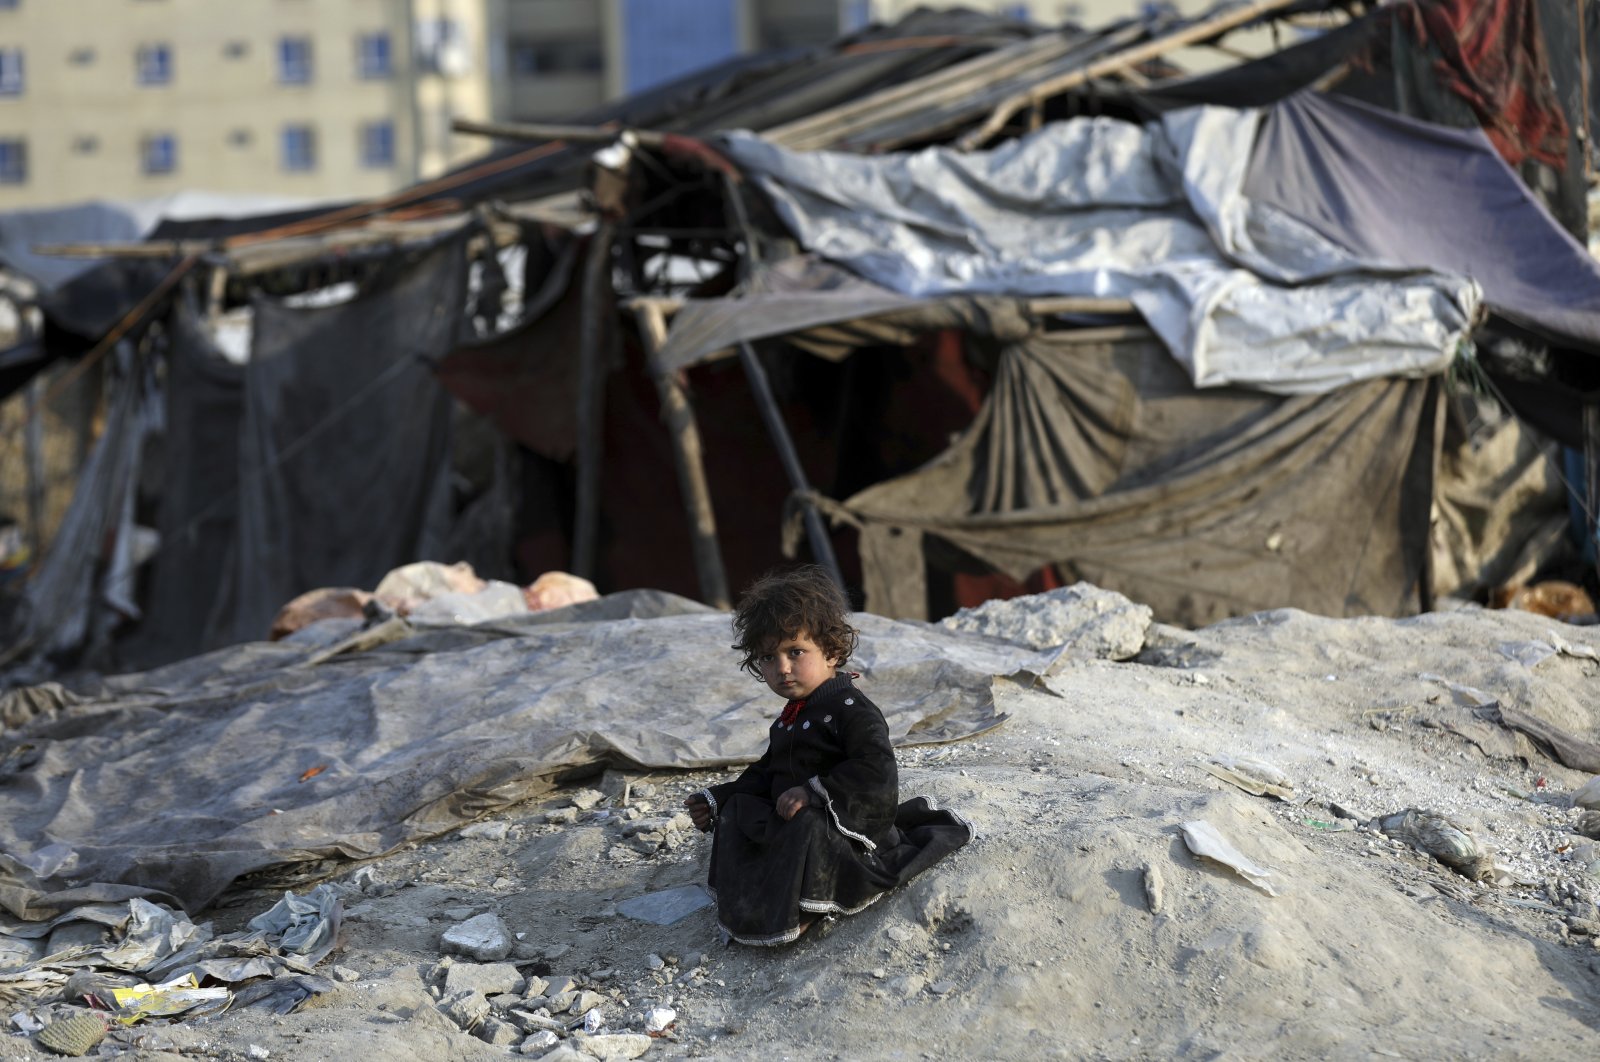 An internally displaced girl poses for a photograph outside her temporary home in the city of Kabul, Afghanistan, Jan. 18, 2021. (AP Photo)